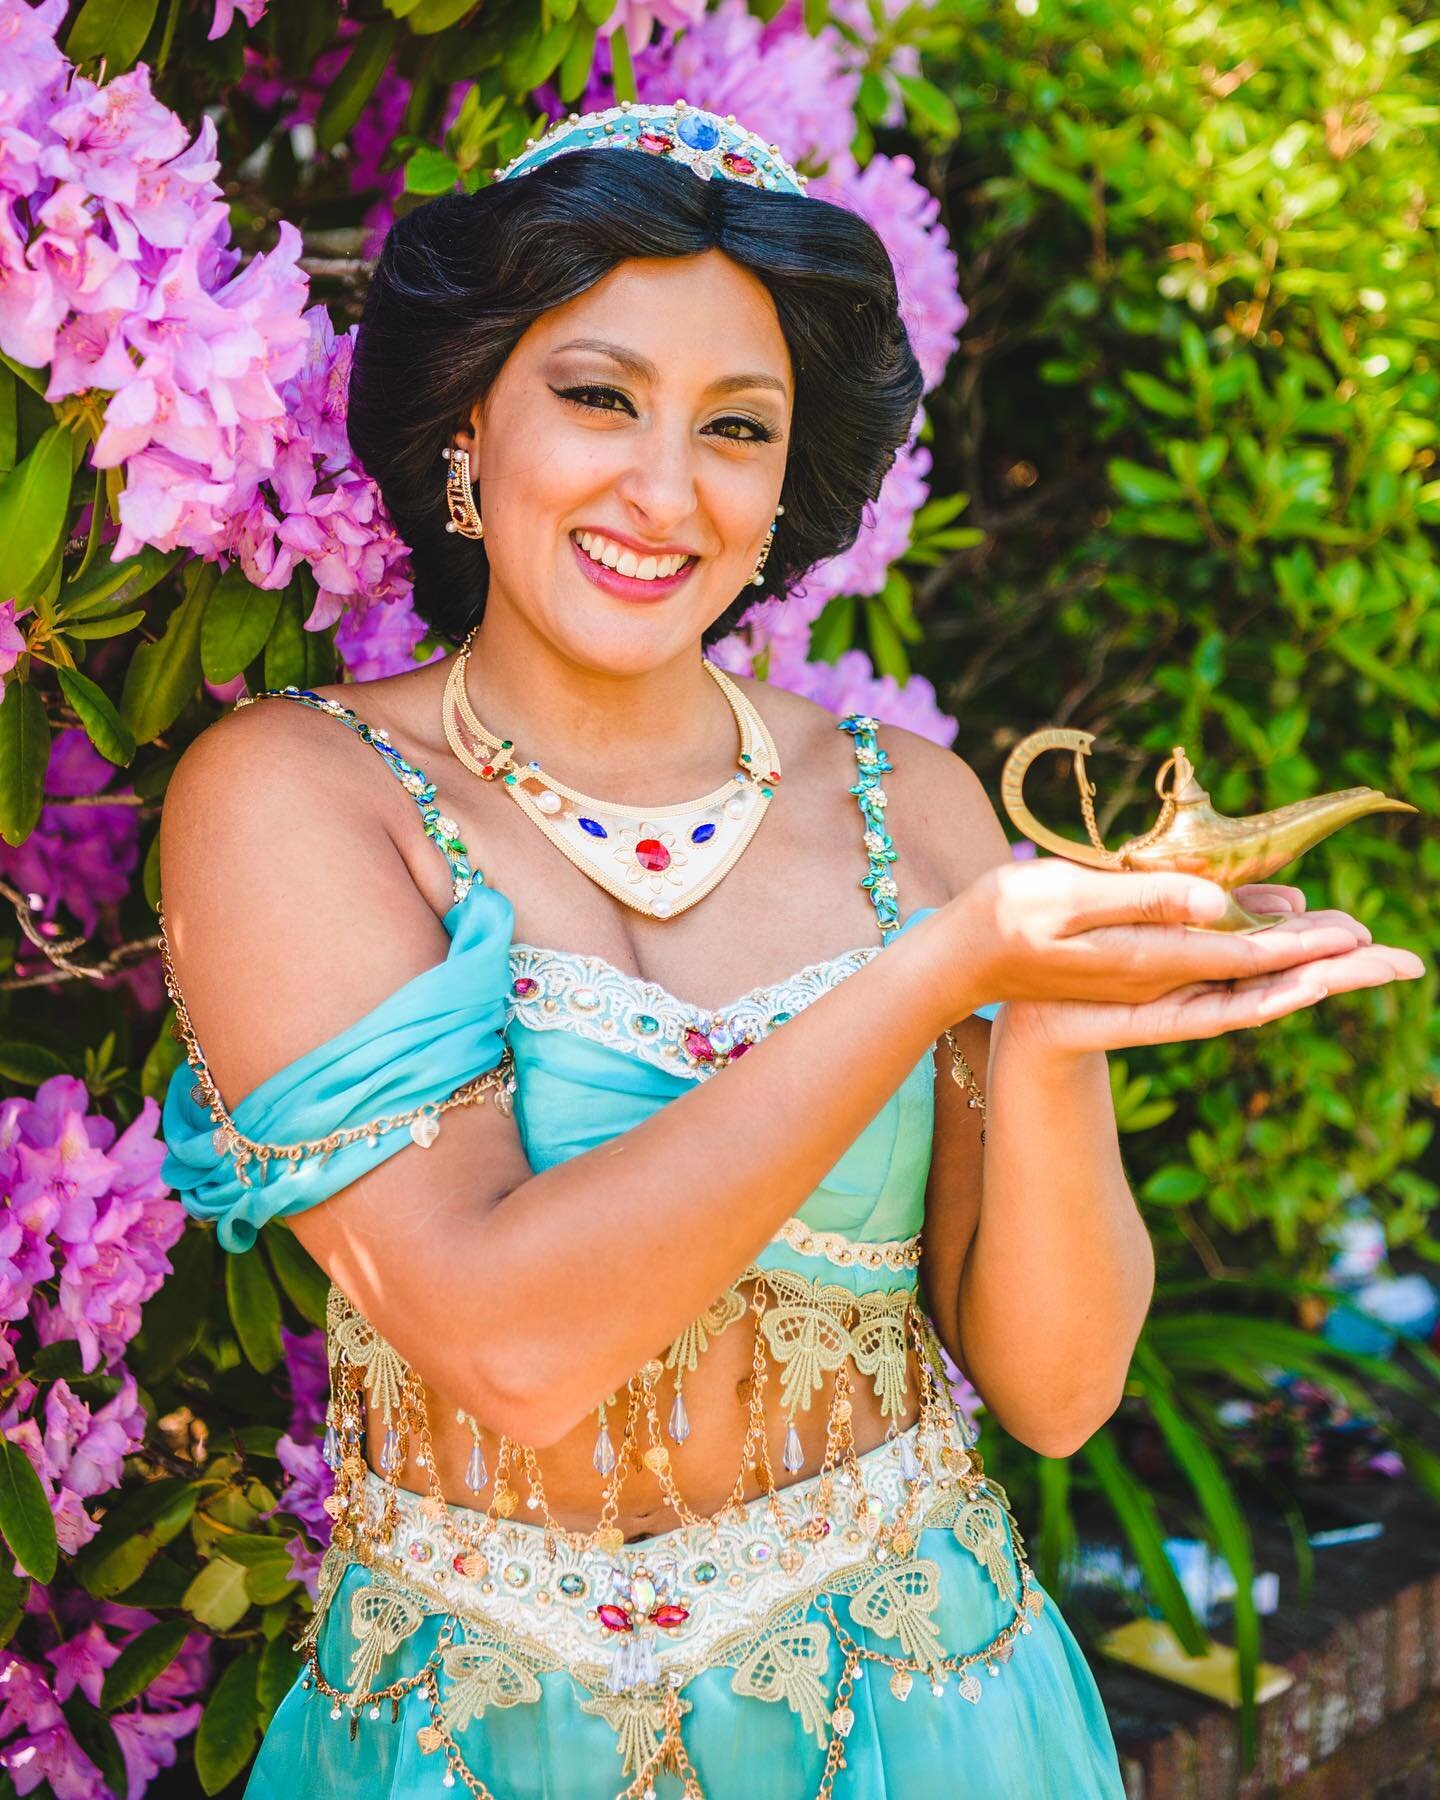 Our Desert Sultana loves the heat wave! It reminds her of home! ✨🧞&zwj;♂️✨
Invite her to grant your wish at your next party or event! Www.sparkadreamprincessparties.com 
.
📸: @jennplantography
.
.
.
.
.
.
.
.
.
.
.
.
.
.
.
.
.
.
.
.
#DanversMa #Sal